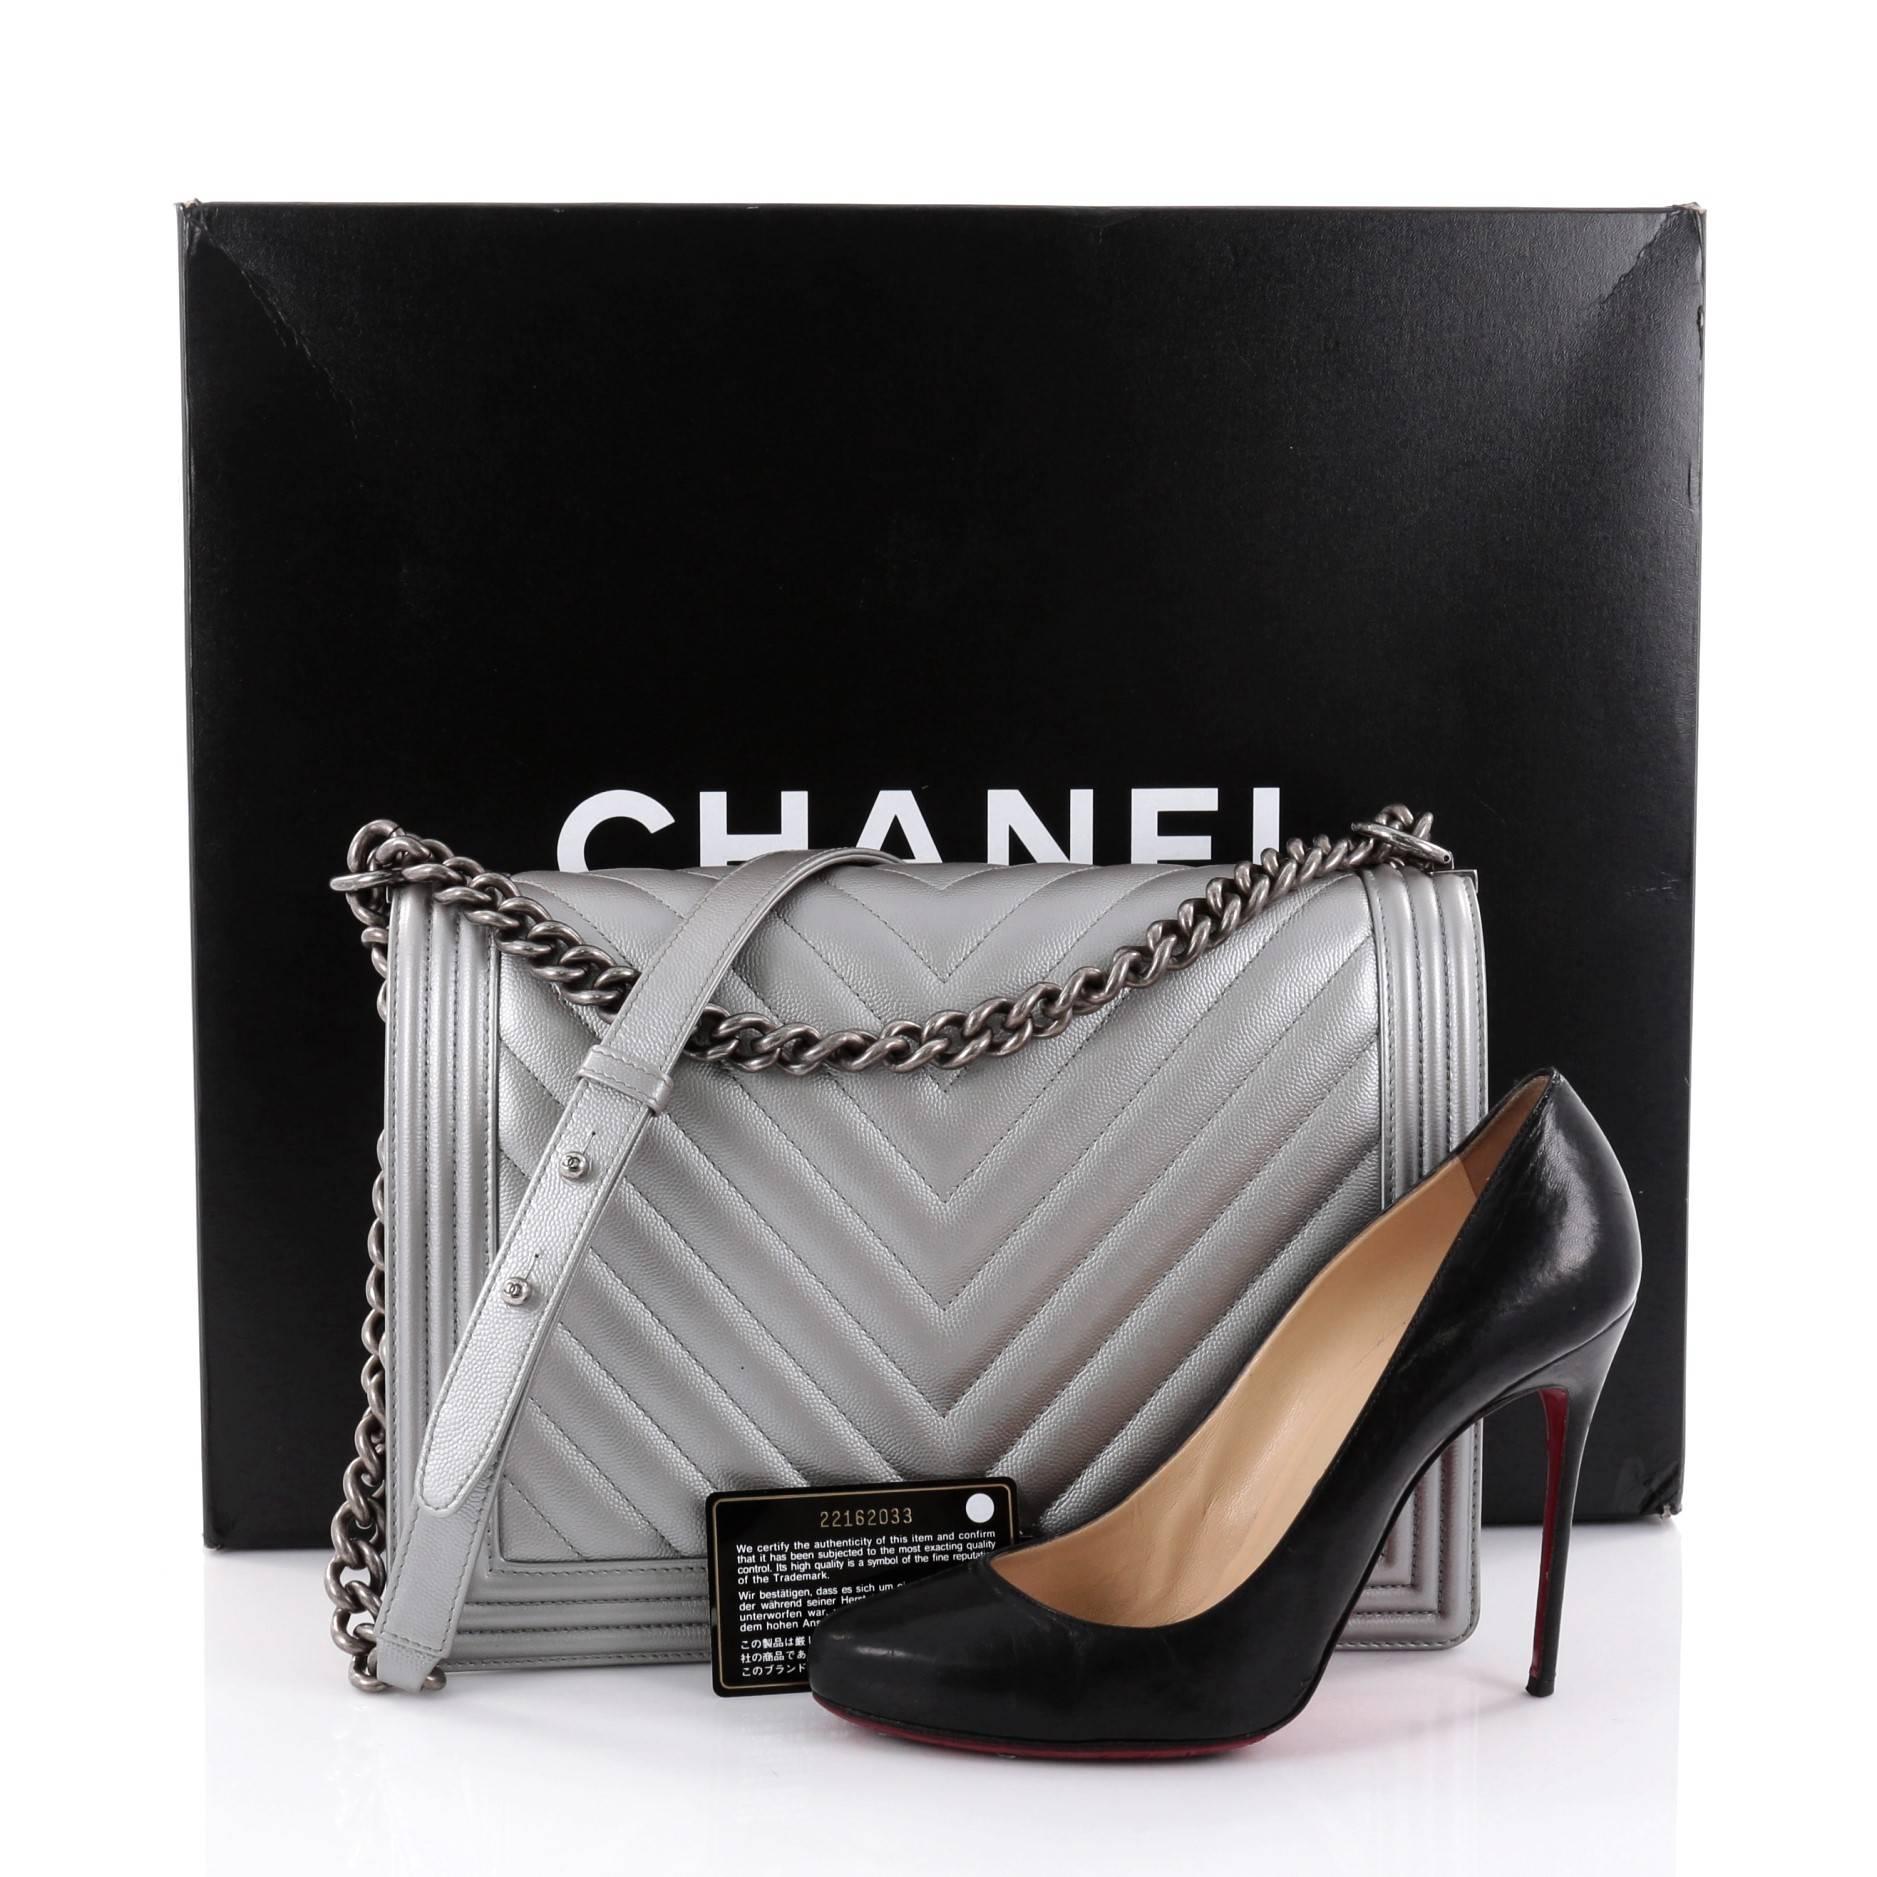 This authentic Chanel Boy Flap Bag Chevron Caviar Large combines classic Chanel craftsmanship with definitive style fit for the contemporary fashionista. Crafted from silver chevron quilted caviar leather with a structured rectangular silhouette,